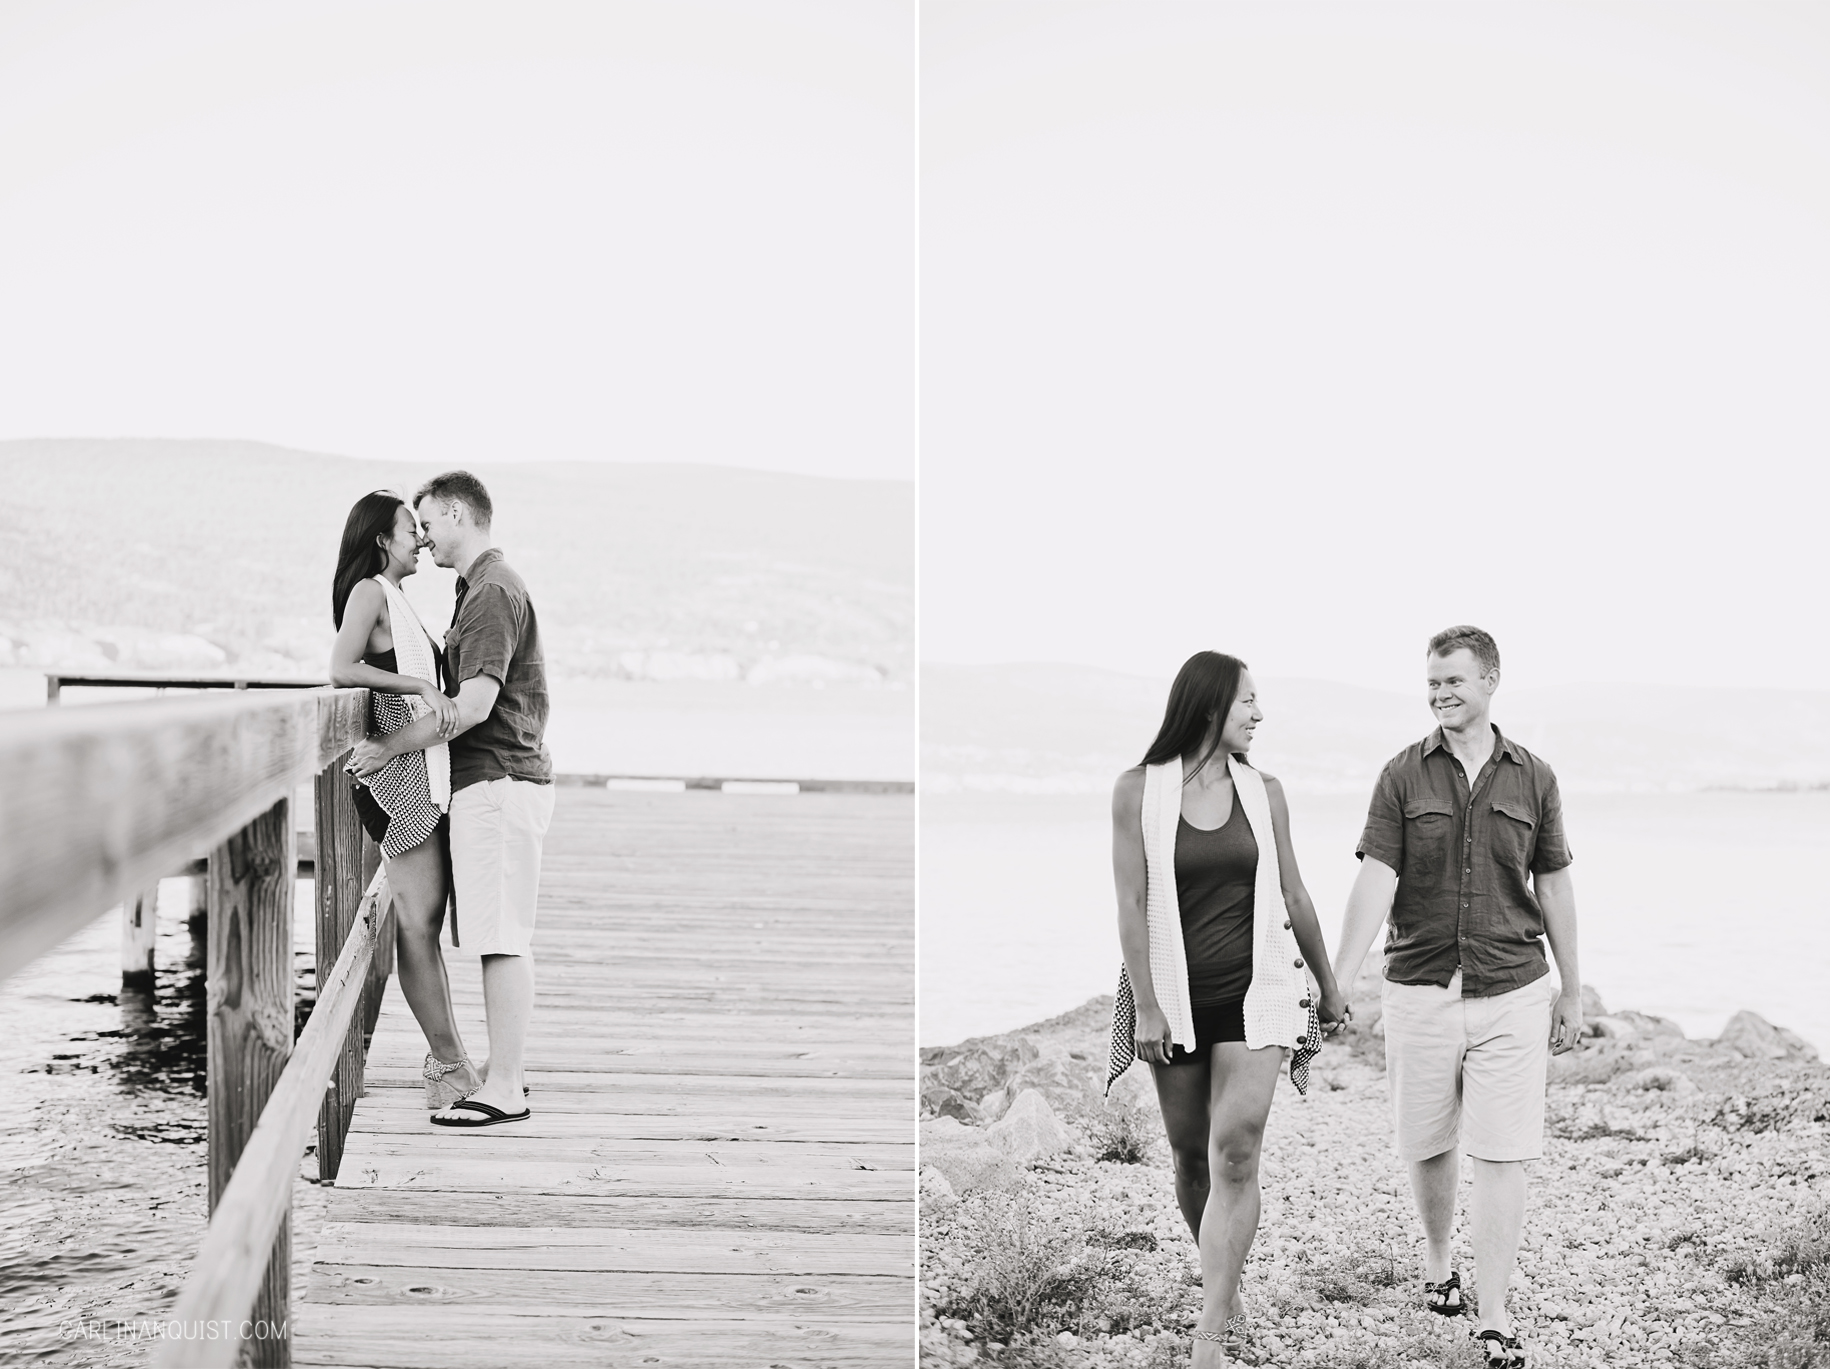 Summerland Engagement Photos | Lake | Love | Carlin Anquist Photography